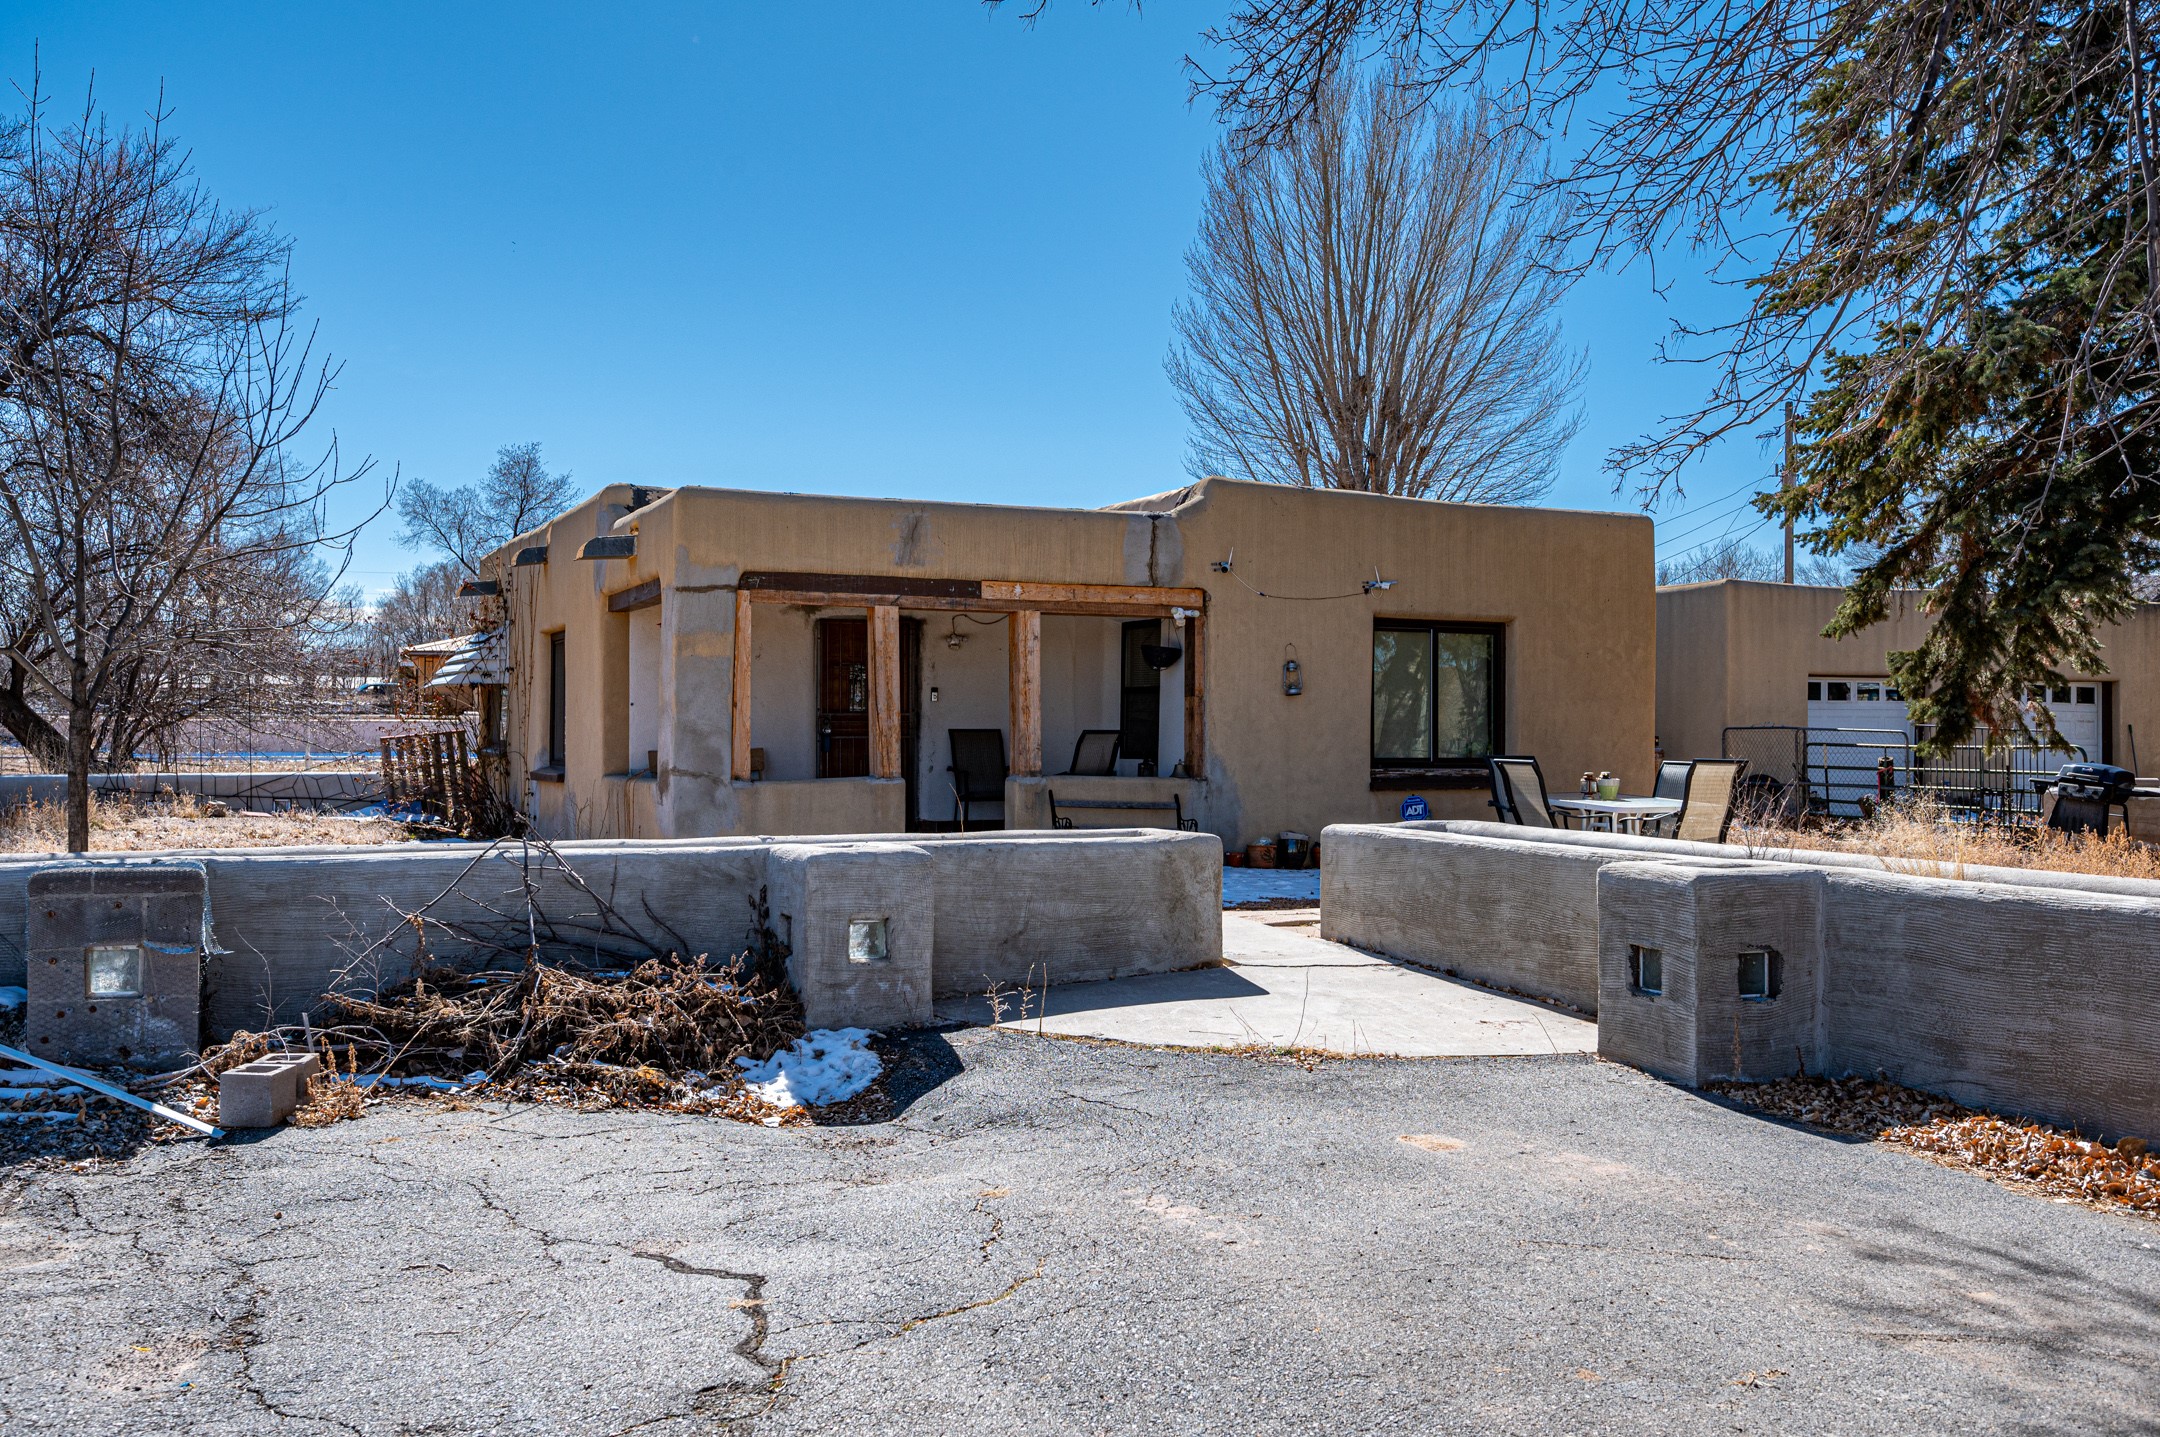 45 Feather, Santa Fe, New Mexico 87506, 2 Bedrooms Bedrooms, ,1 BathroomBathrooms,Residential,For Sale,45 Feather,202400403